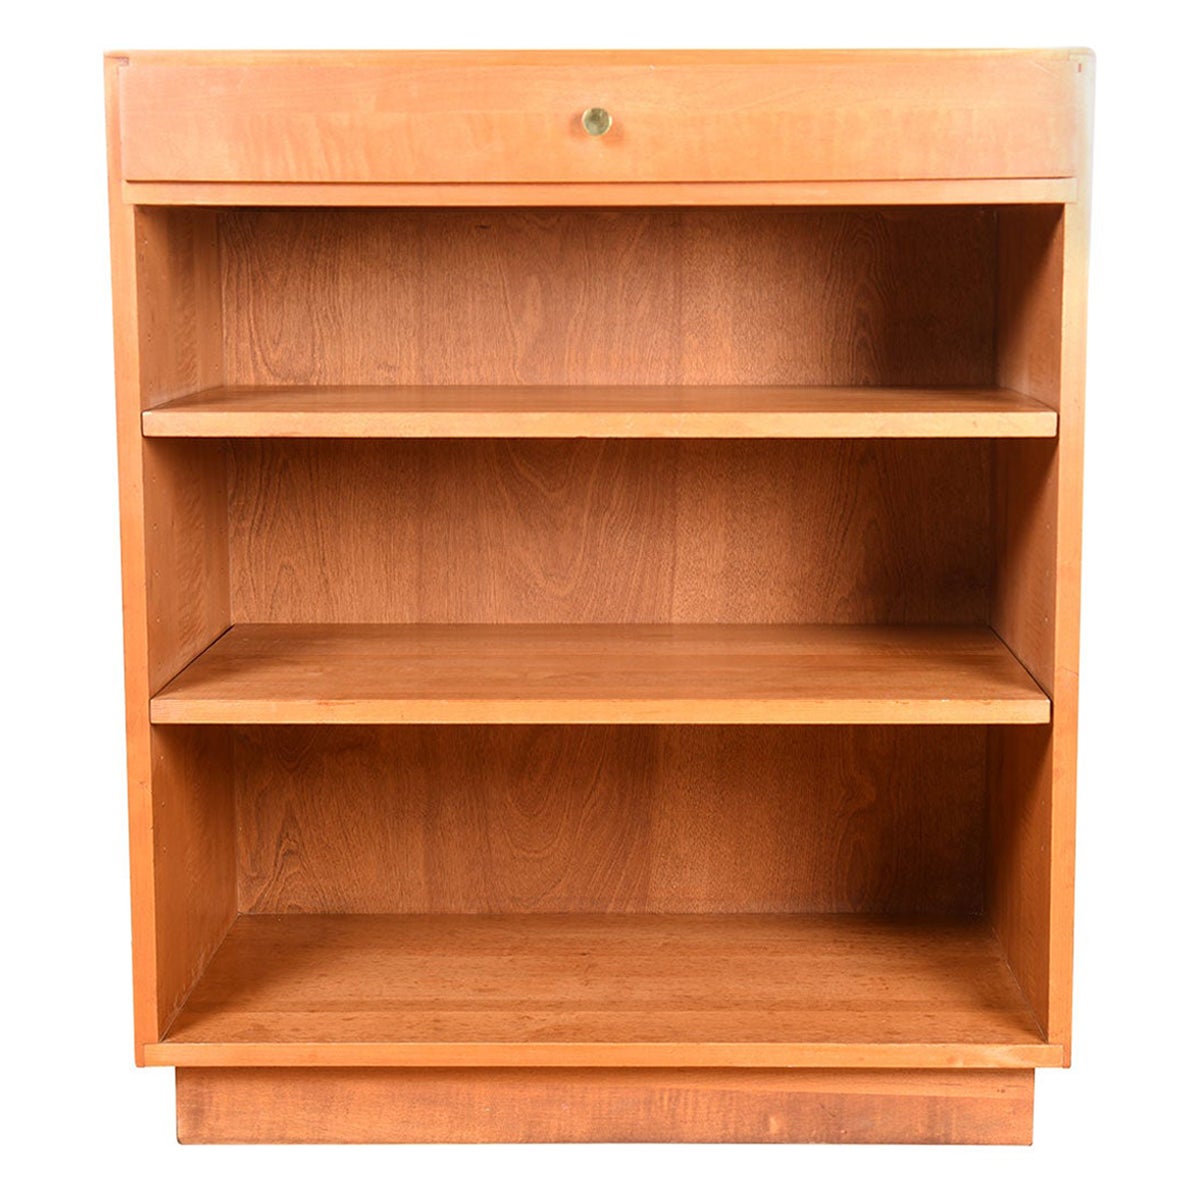 Perfectly Mid-Sized Adj Shelf Bookcase with Drawer in Manner of Paul McCobb